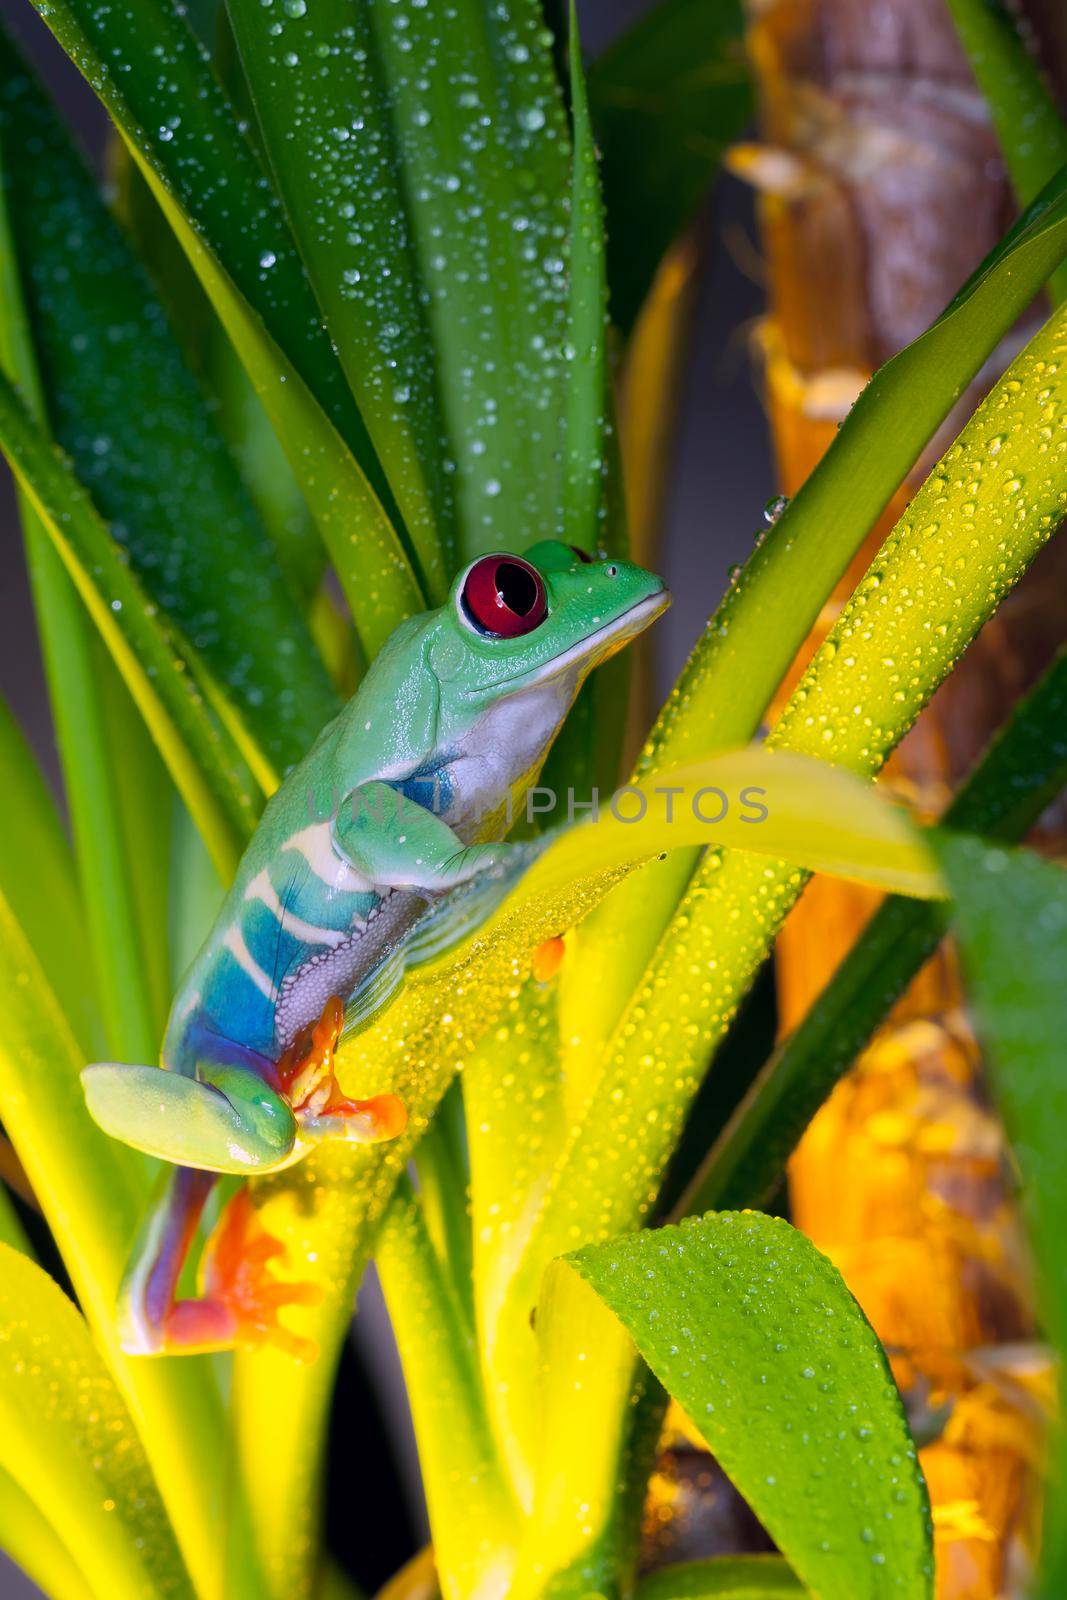 Red-eyed tree frog climbs on the yellow-lit leaves of the plant with shiny droplets of dew